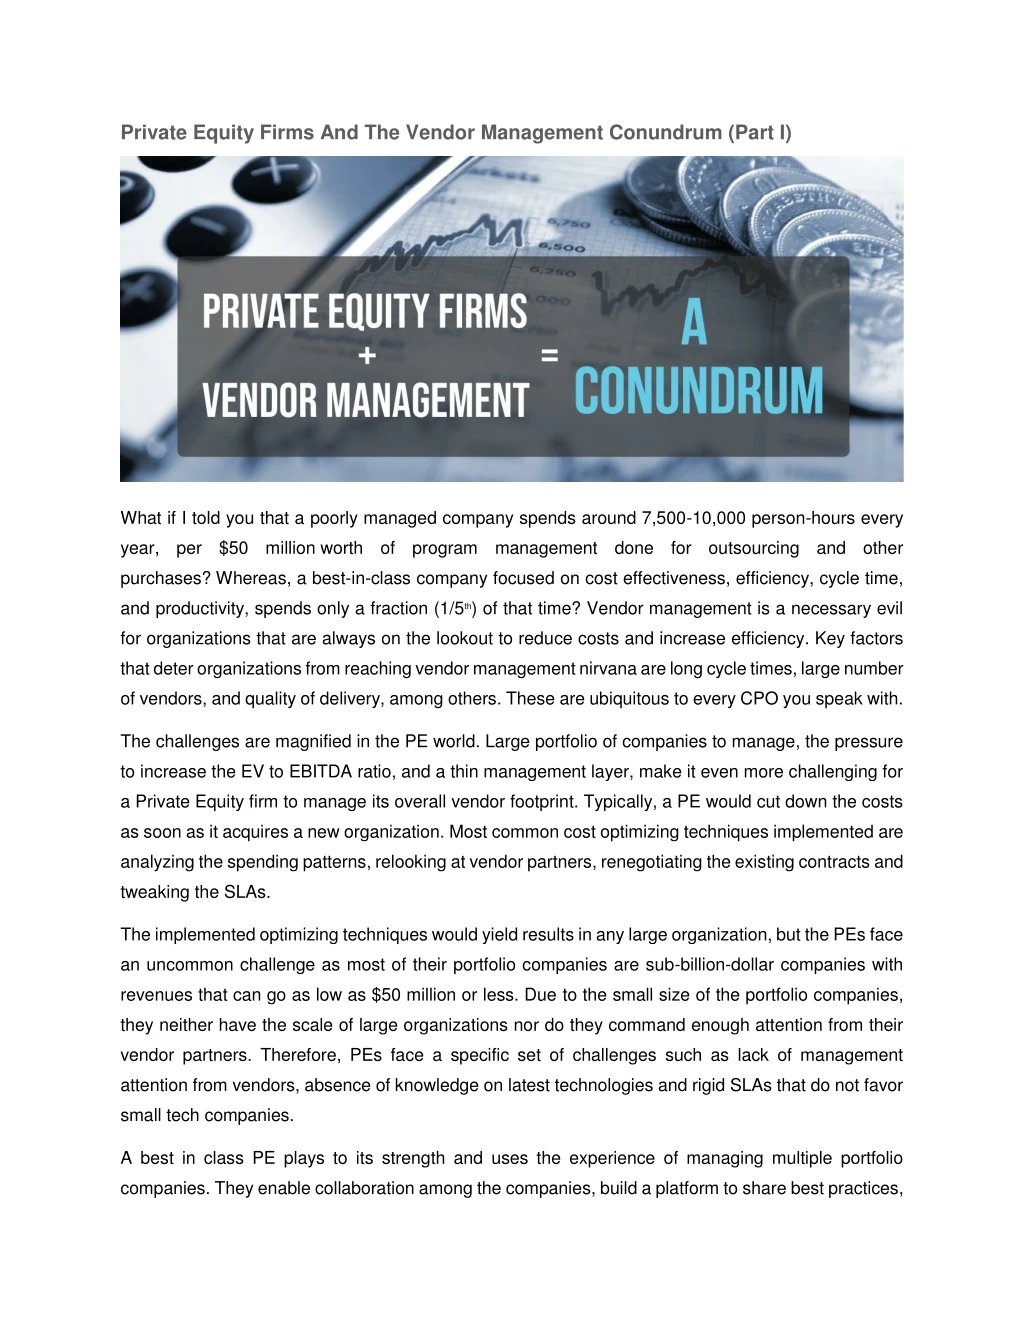 private equity firms and the vendor management